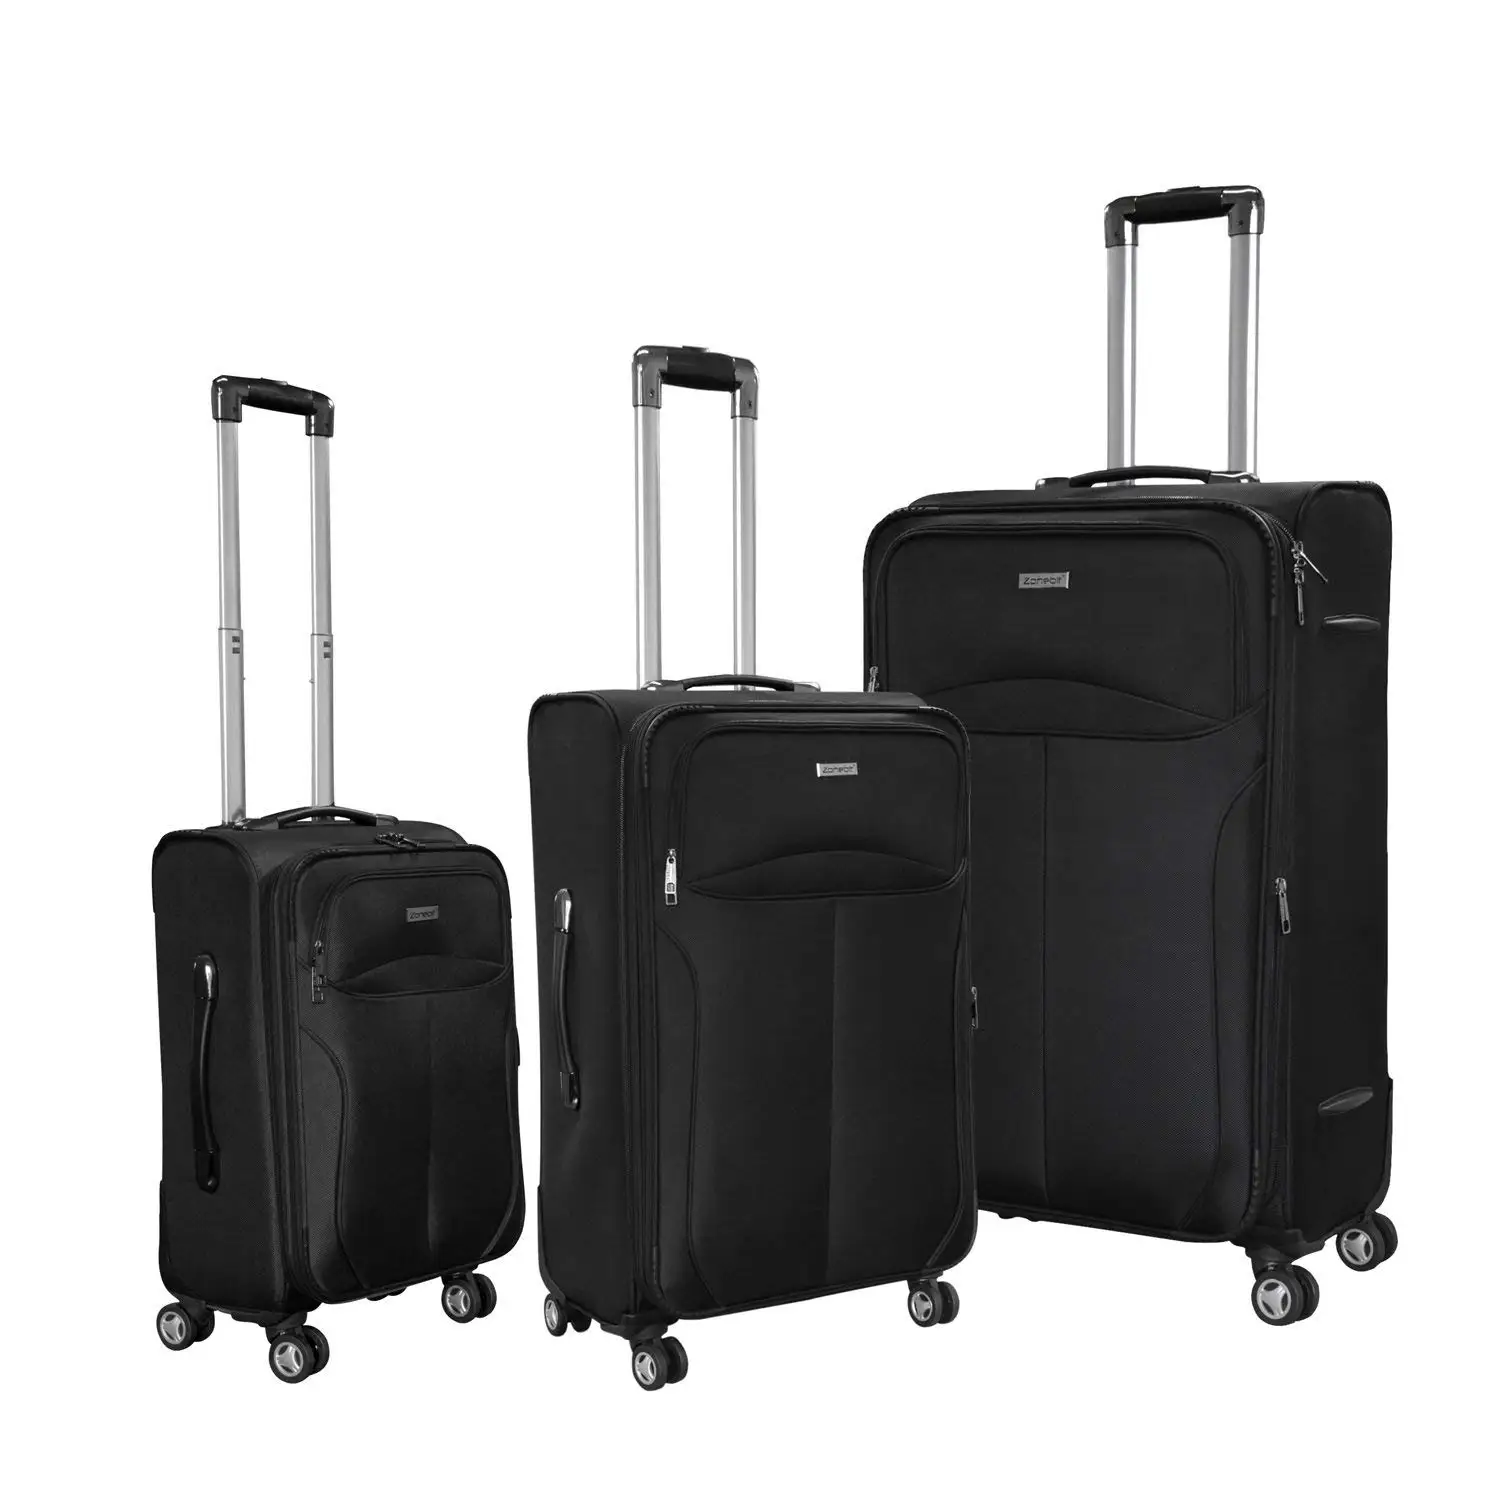 Cheap Small Roller Suitcase, find Small Roller Suitcase deals on line at 0